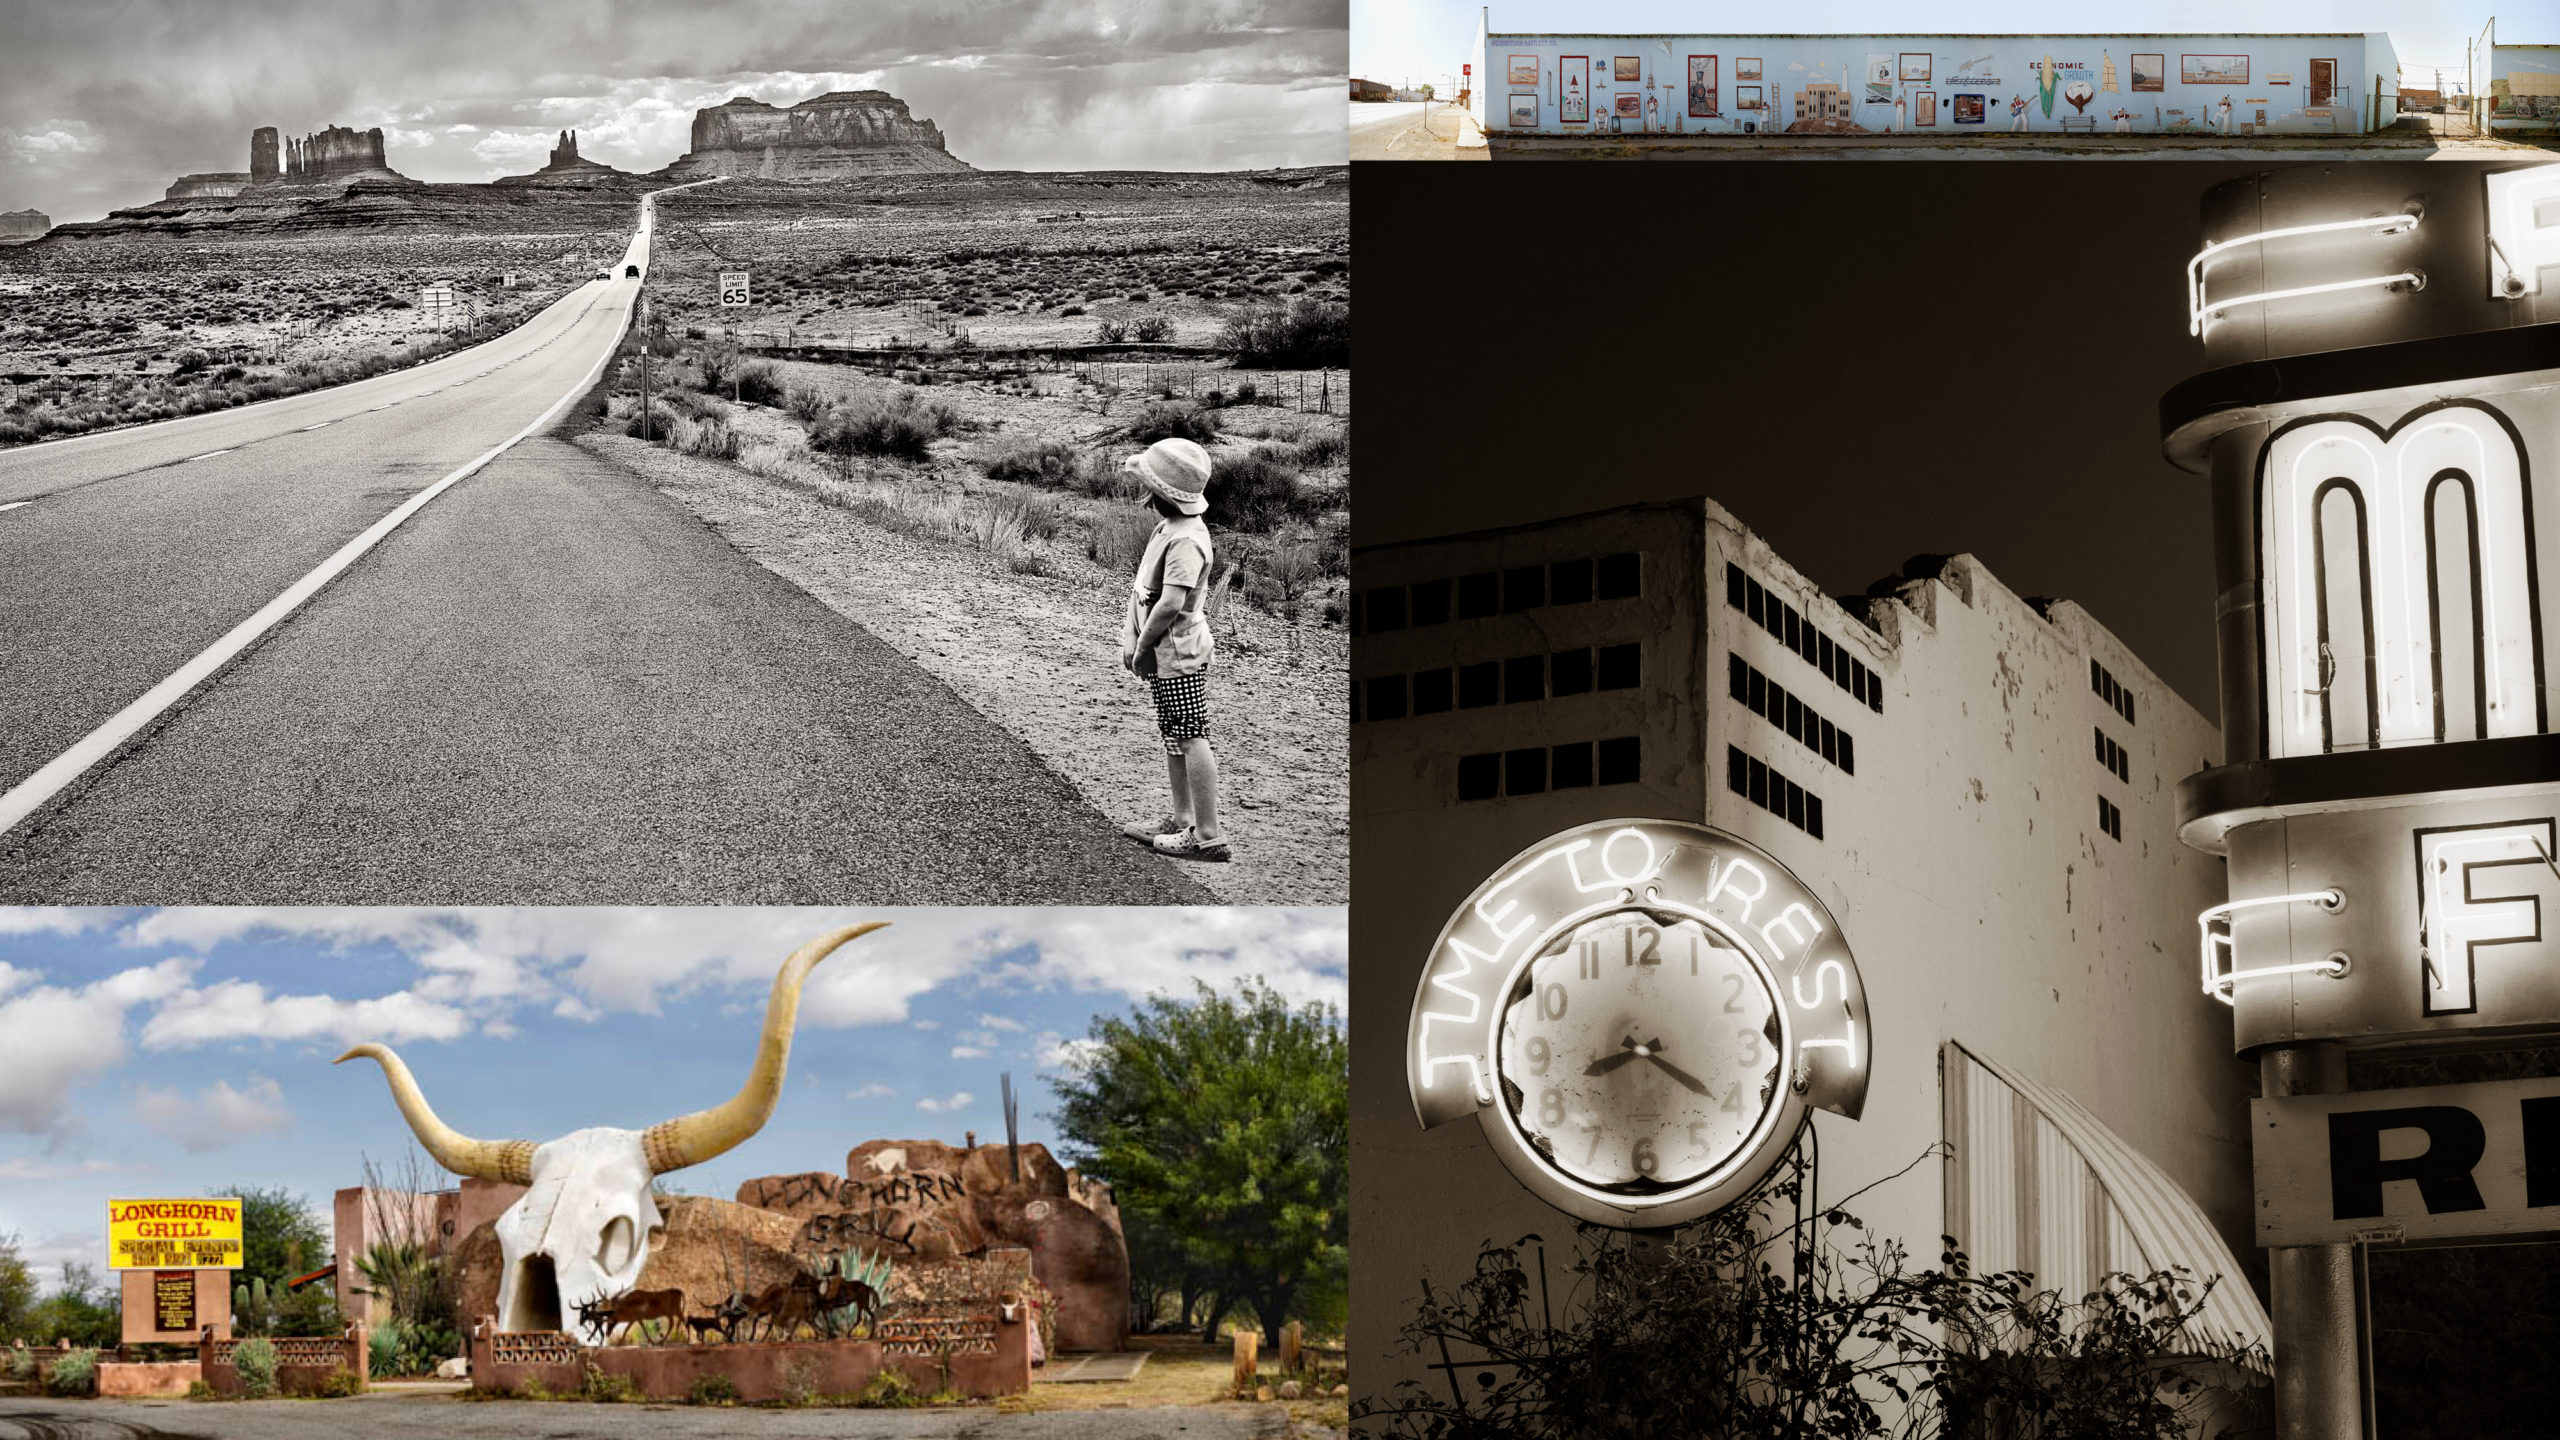 Clockwise from top right: Steve Fitch: Mural in Dimmit, Texas, 2012; Steve Fitch: Motel, Highway 66,Elk City, OK, 1973; Joan Myers: Amado, TX, 2016; Joan Myers: Monument Valley, UT, 2021